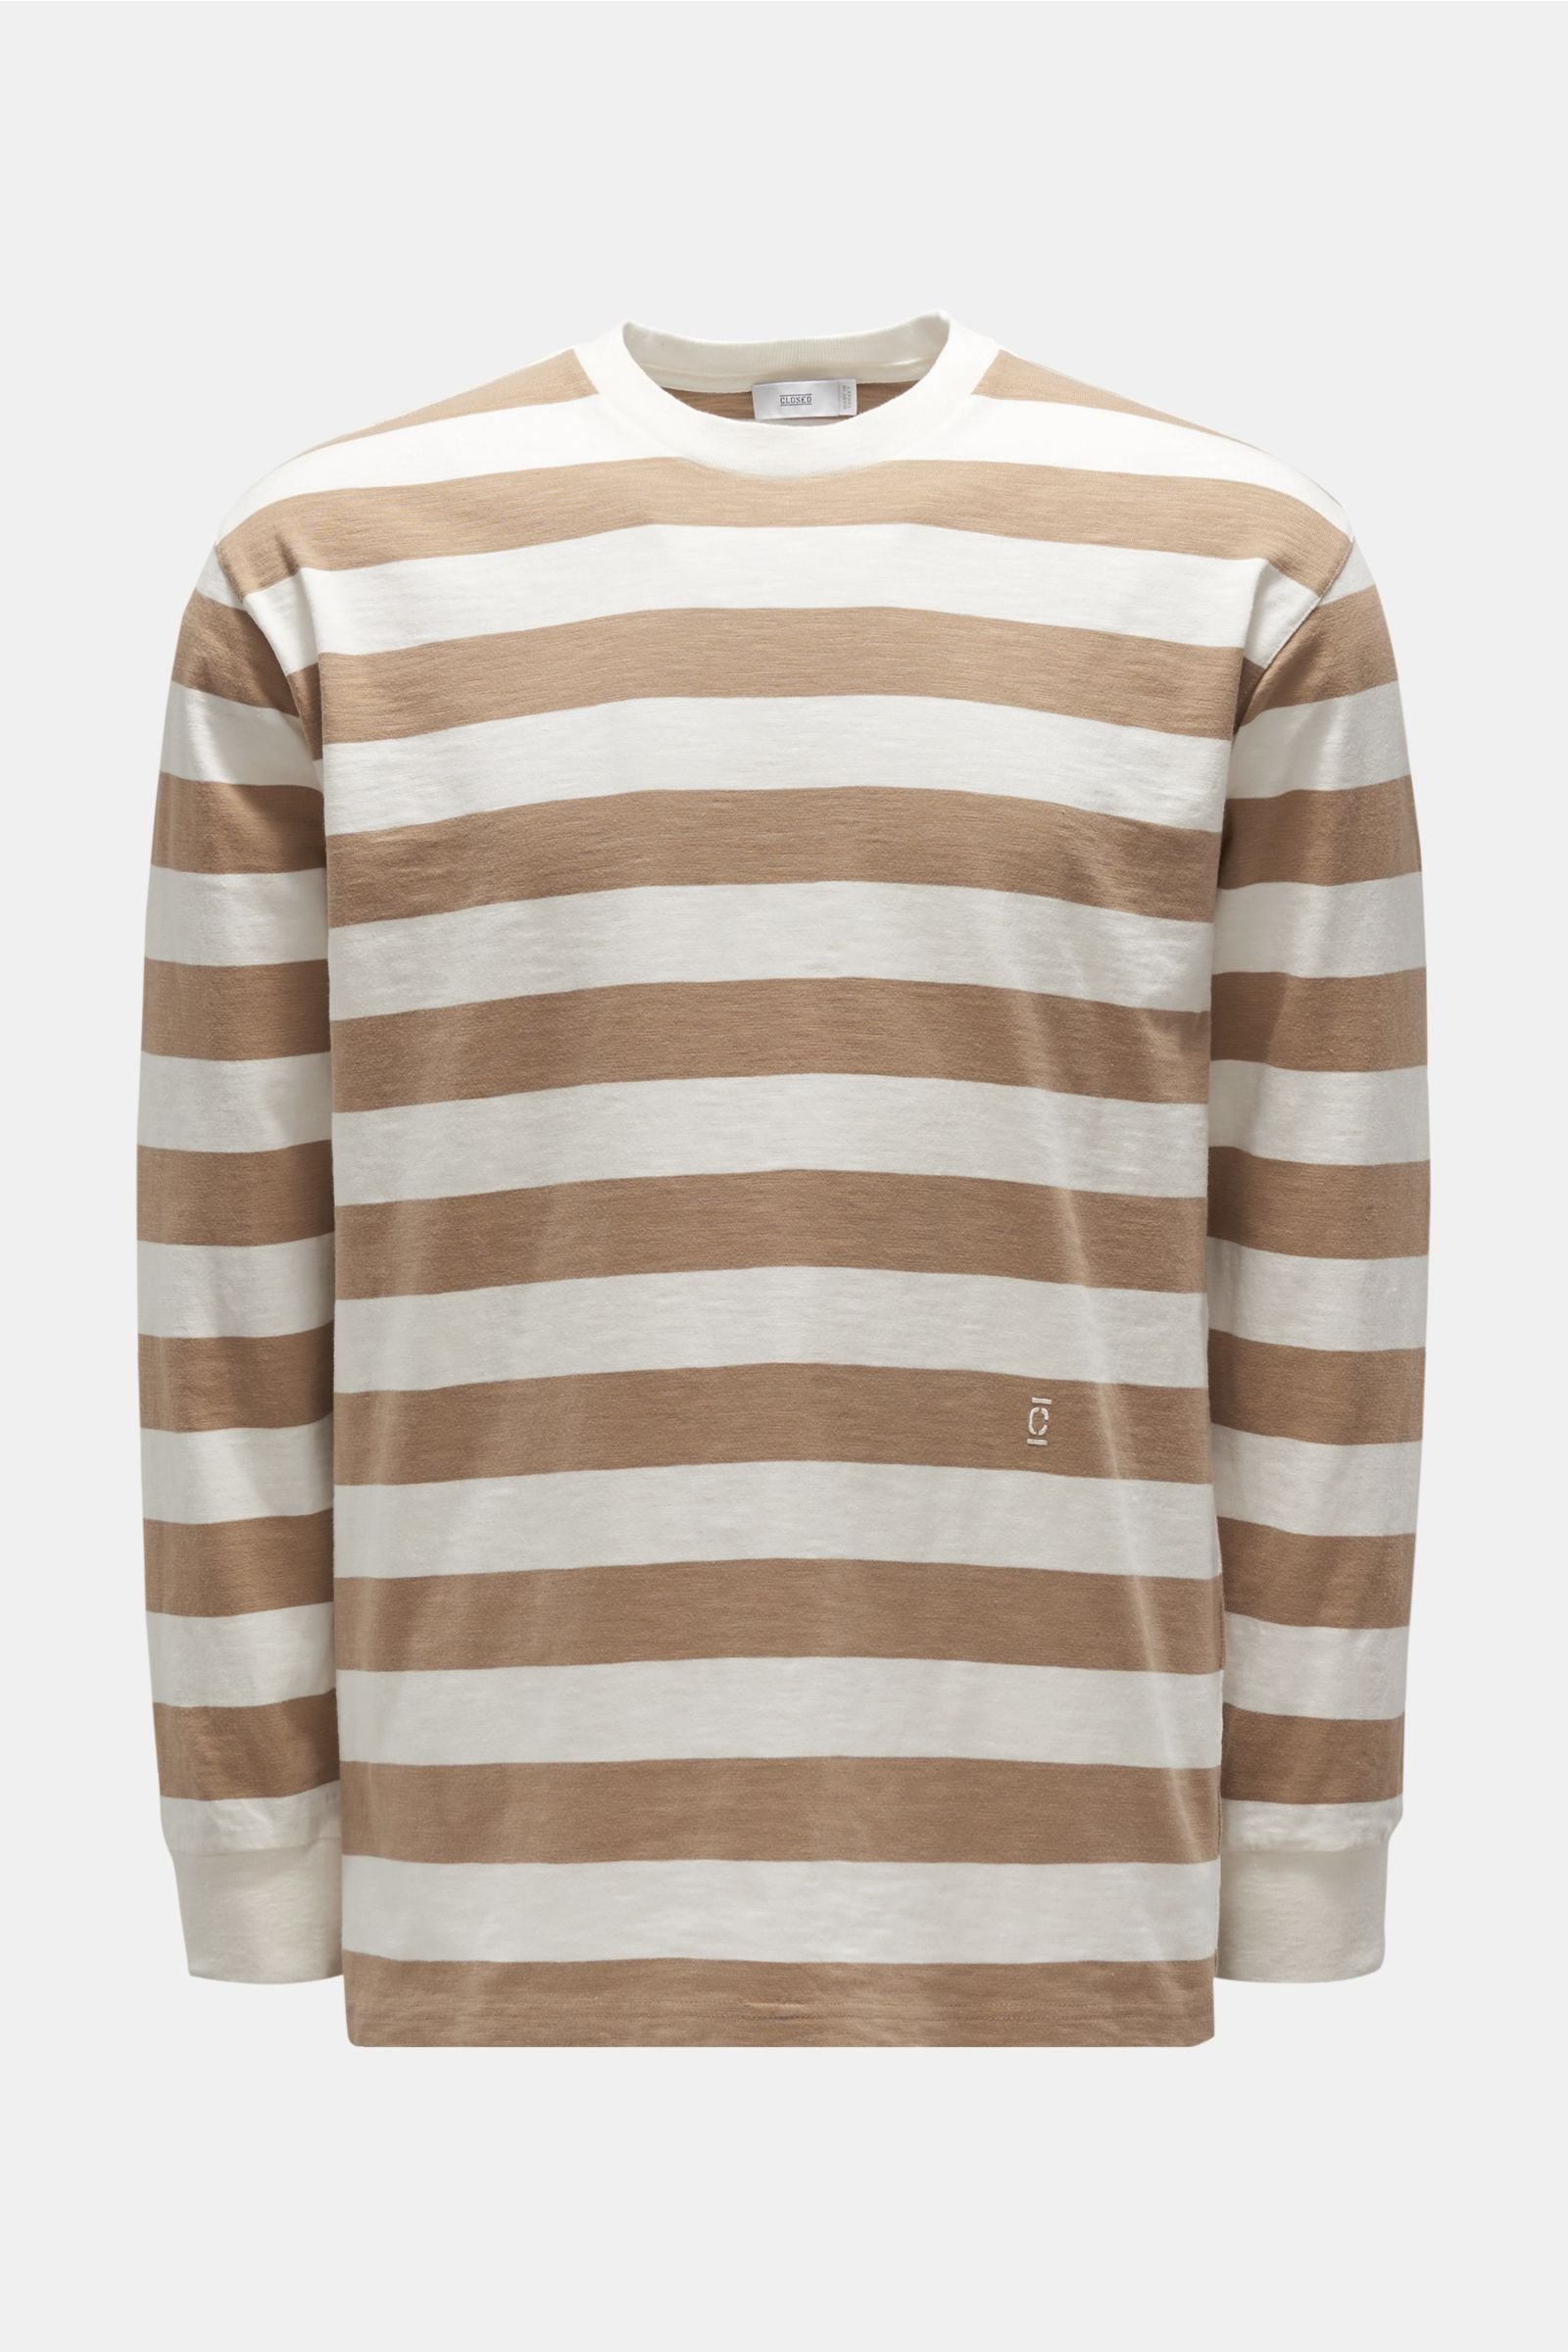 Crew neck long sleeve light brown/off-white striped